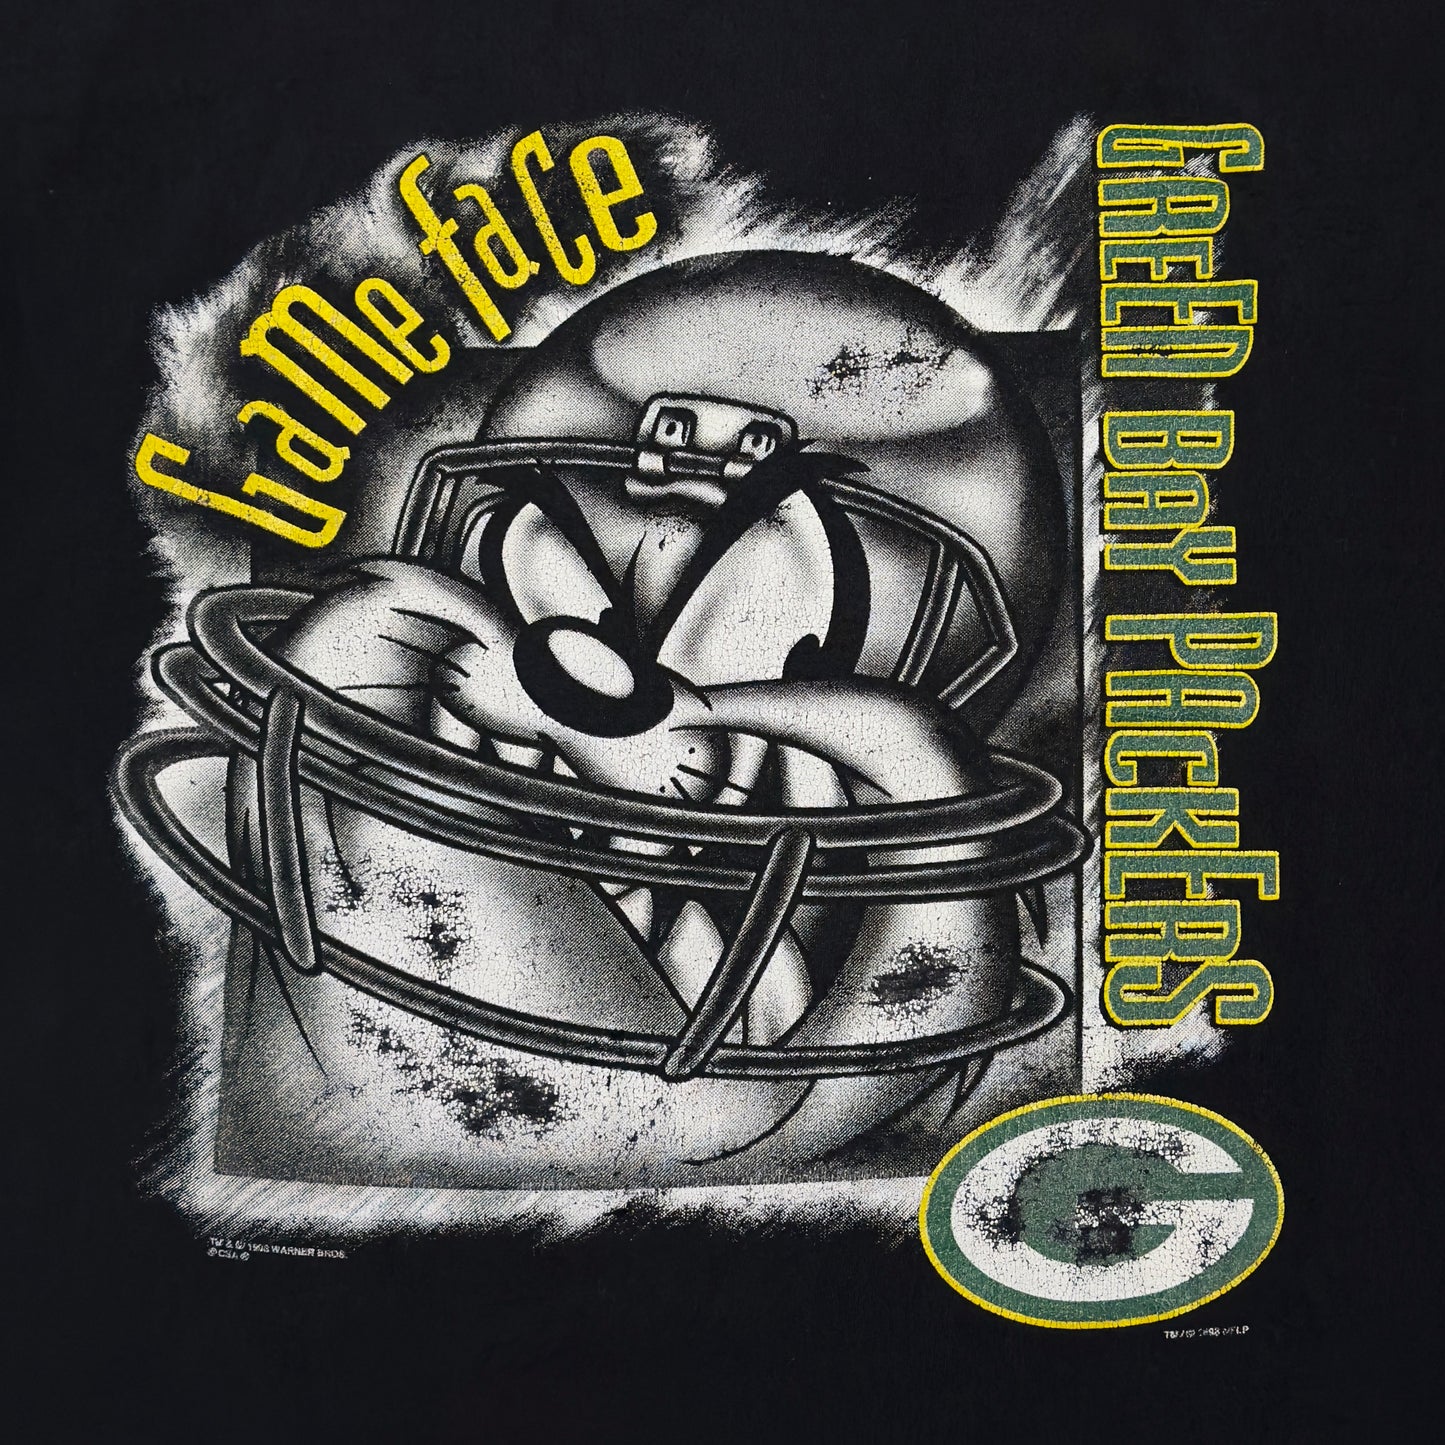 ‘98 | Taz Green Bay Packers Game Face Tee